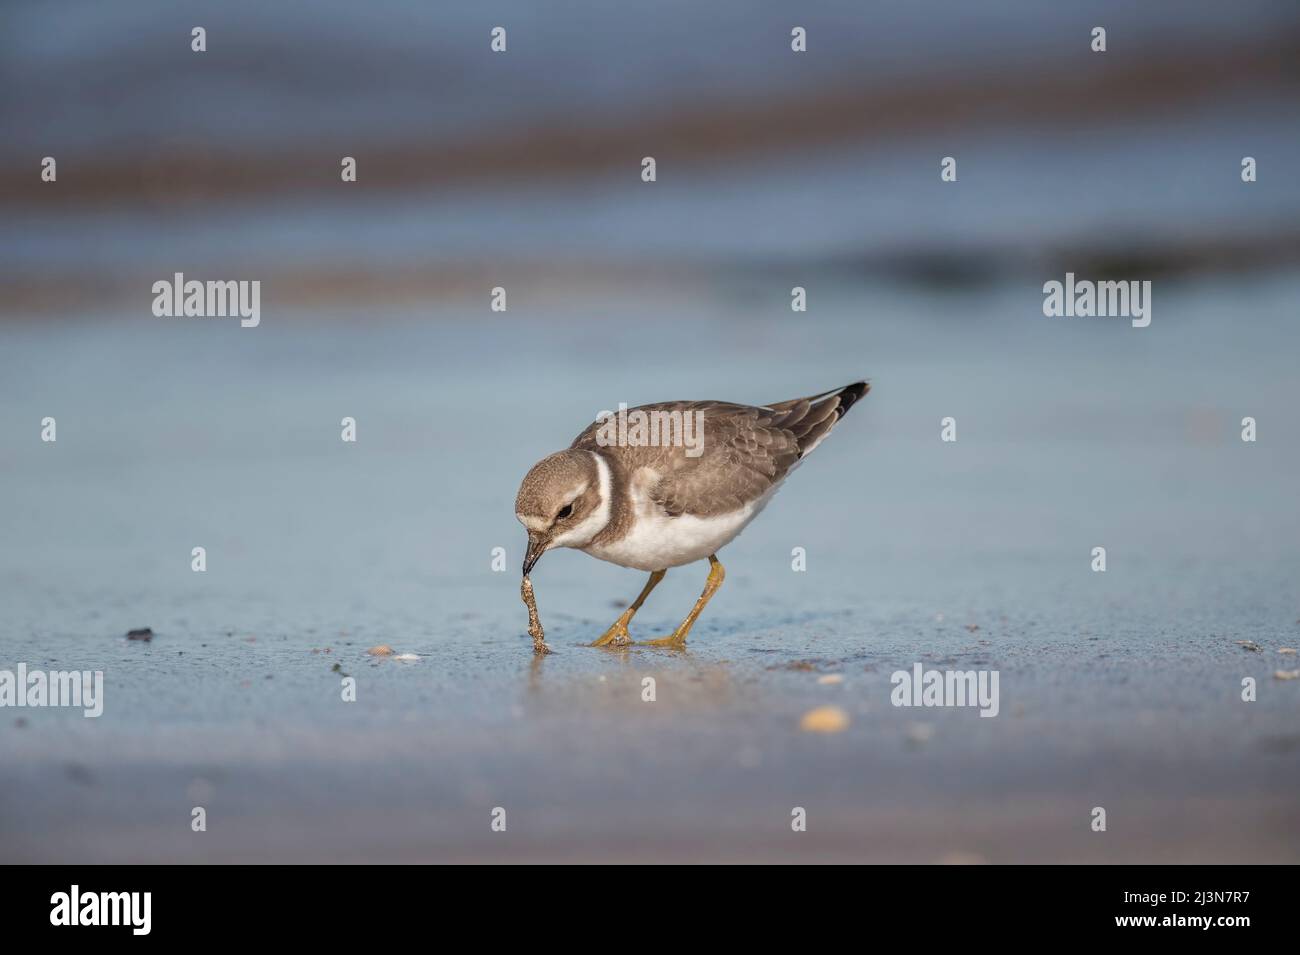 Ringed plover on the beach eating a worm in the Autumn, close up, Stock Photo